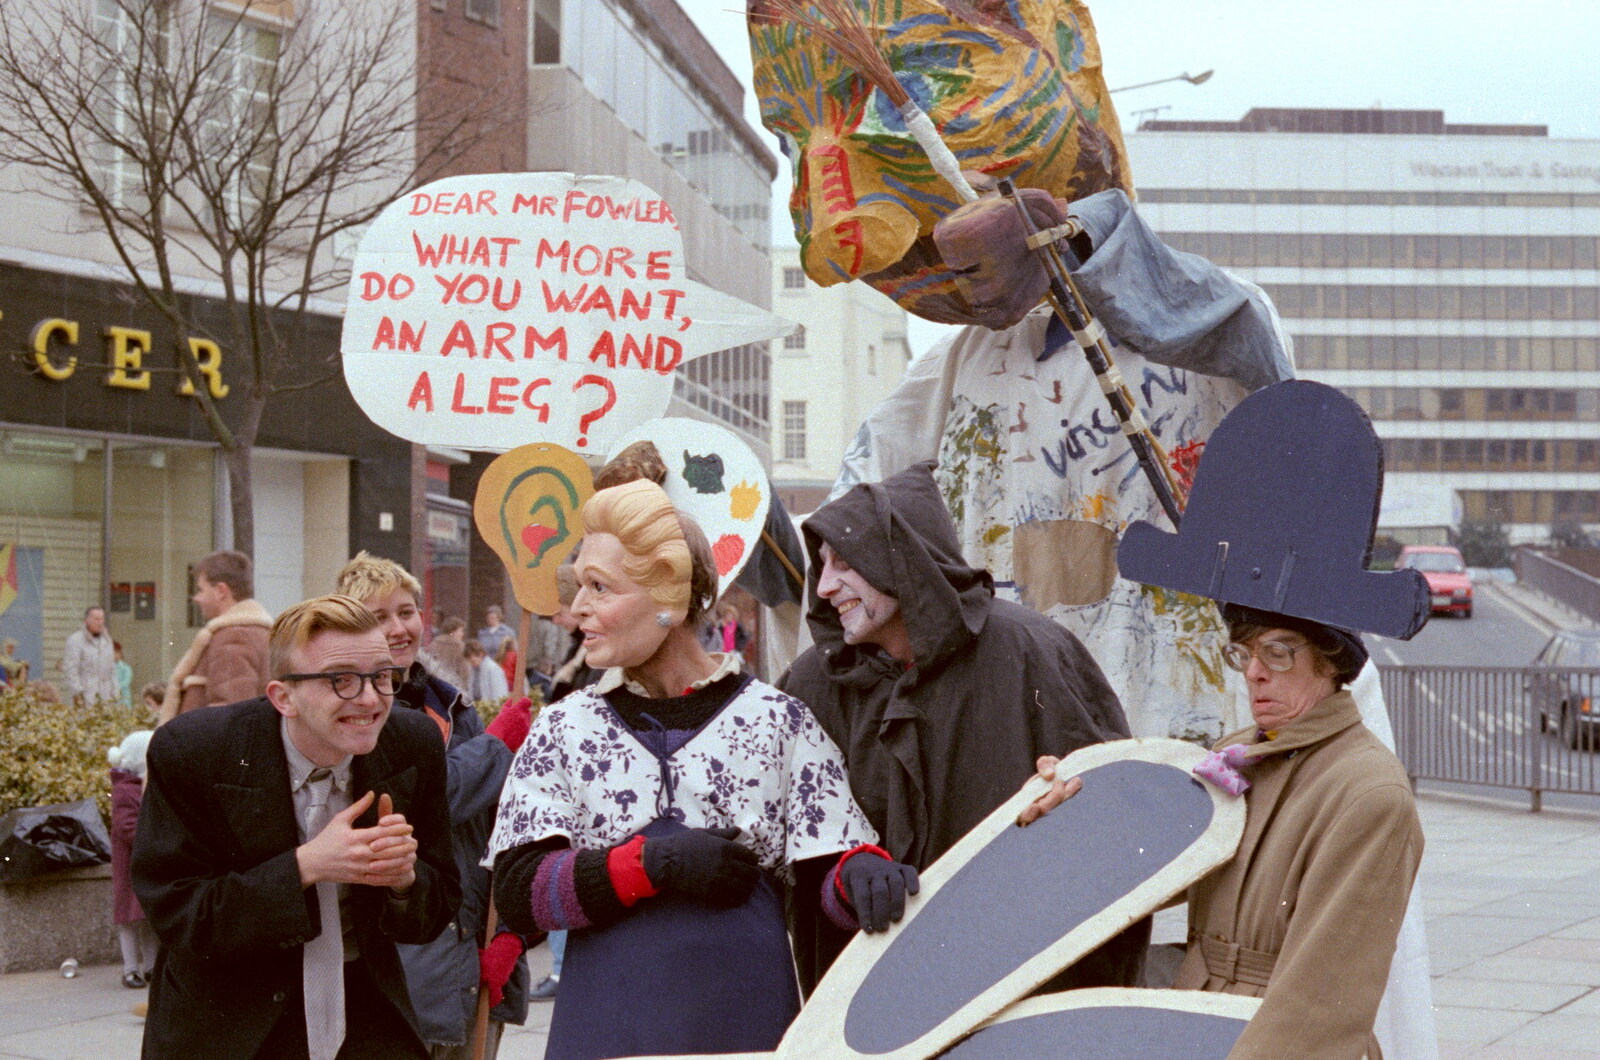 Someone does an impression of Norman Fowler from Uni: A Van Gogh Grant Cuts Protest, Plymouth, Devon - 1st March 1986